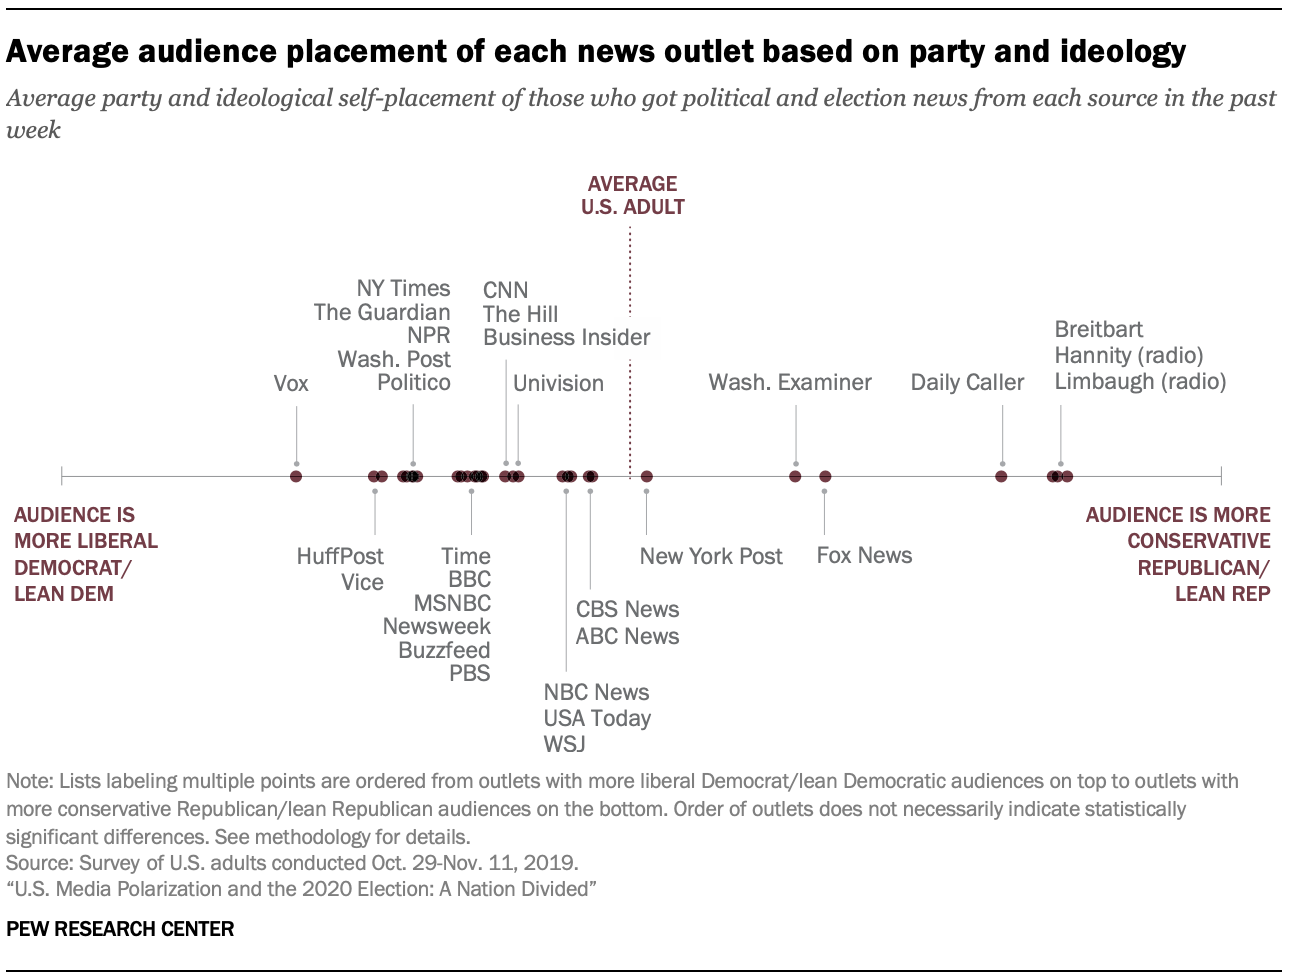 Average audience placement of each news outlet based on party and ideology